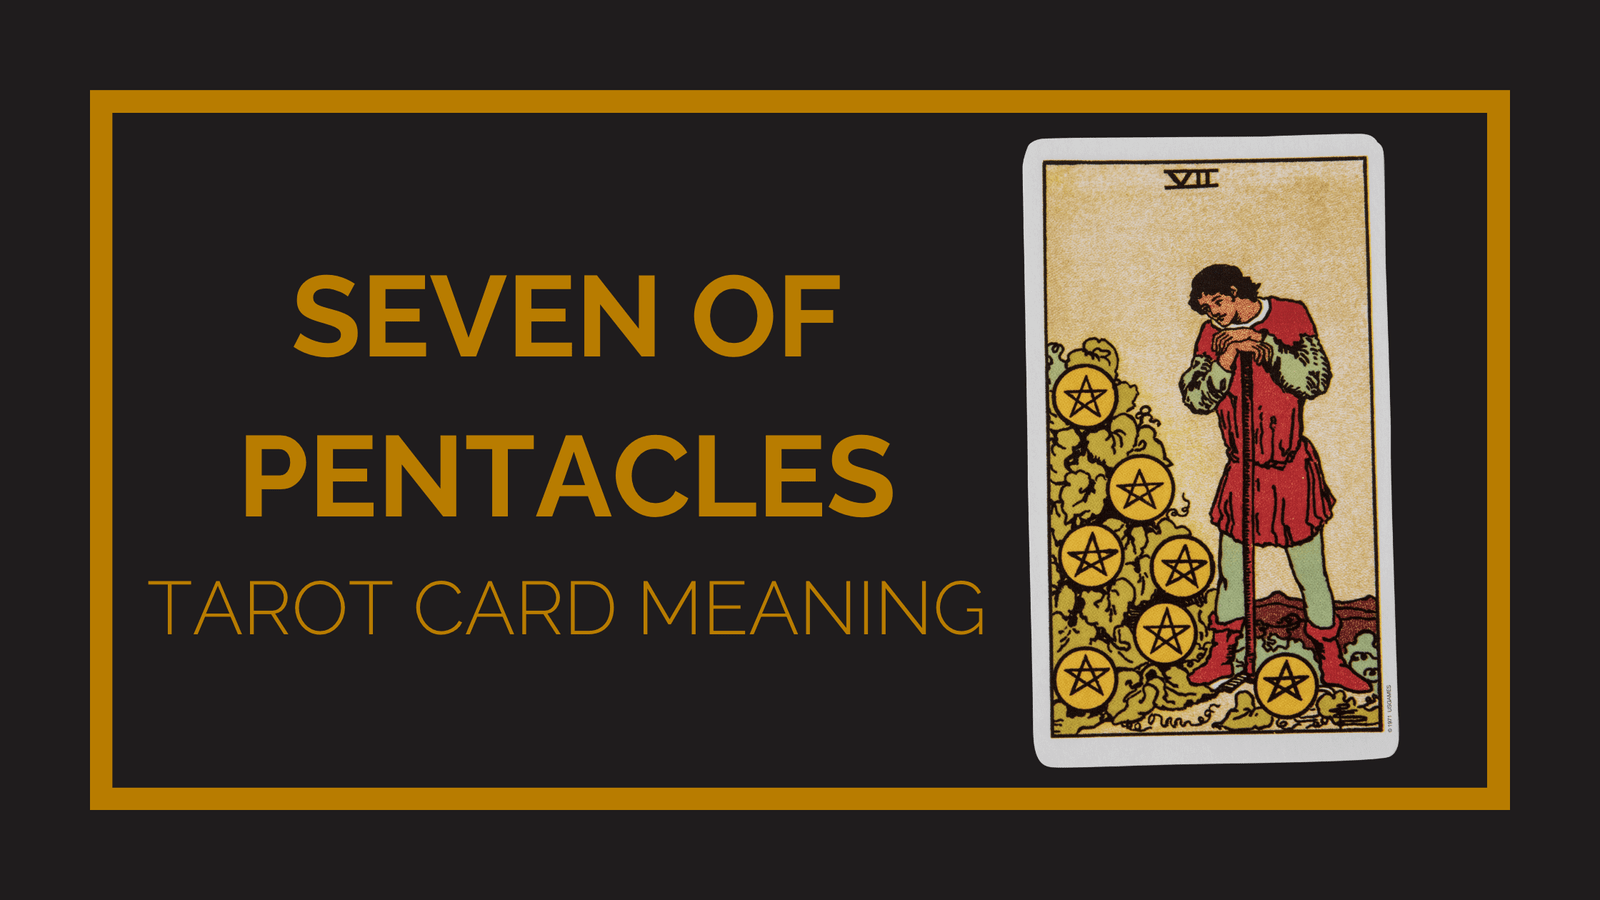 Seven of pentacles tarot card meaning | tarot with gord